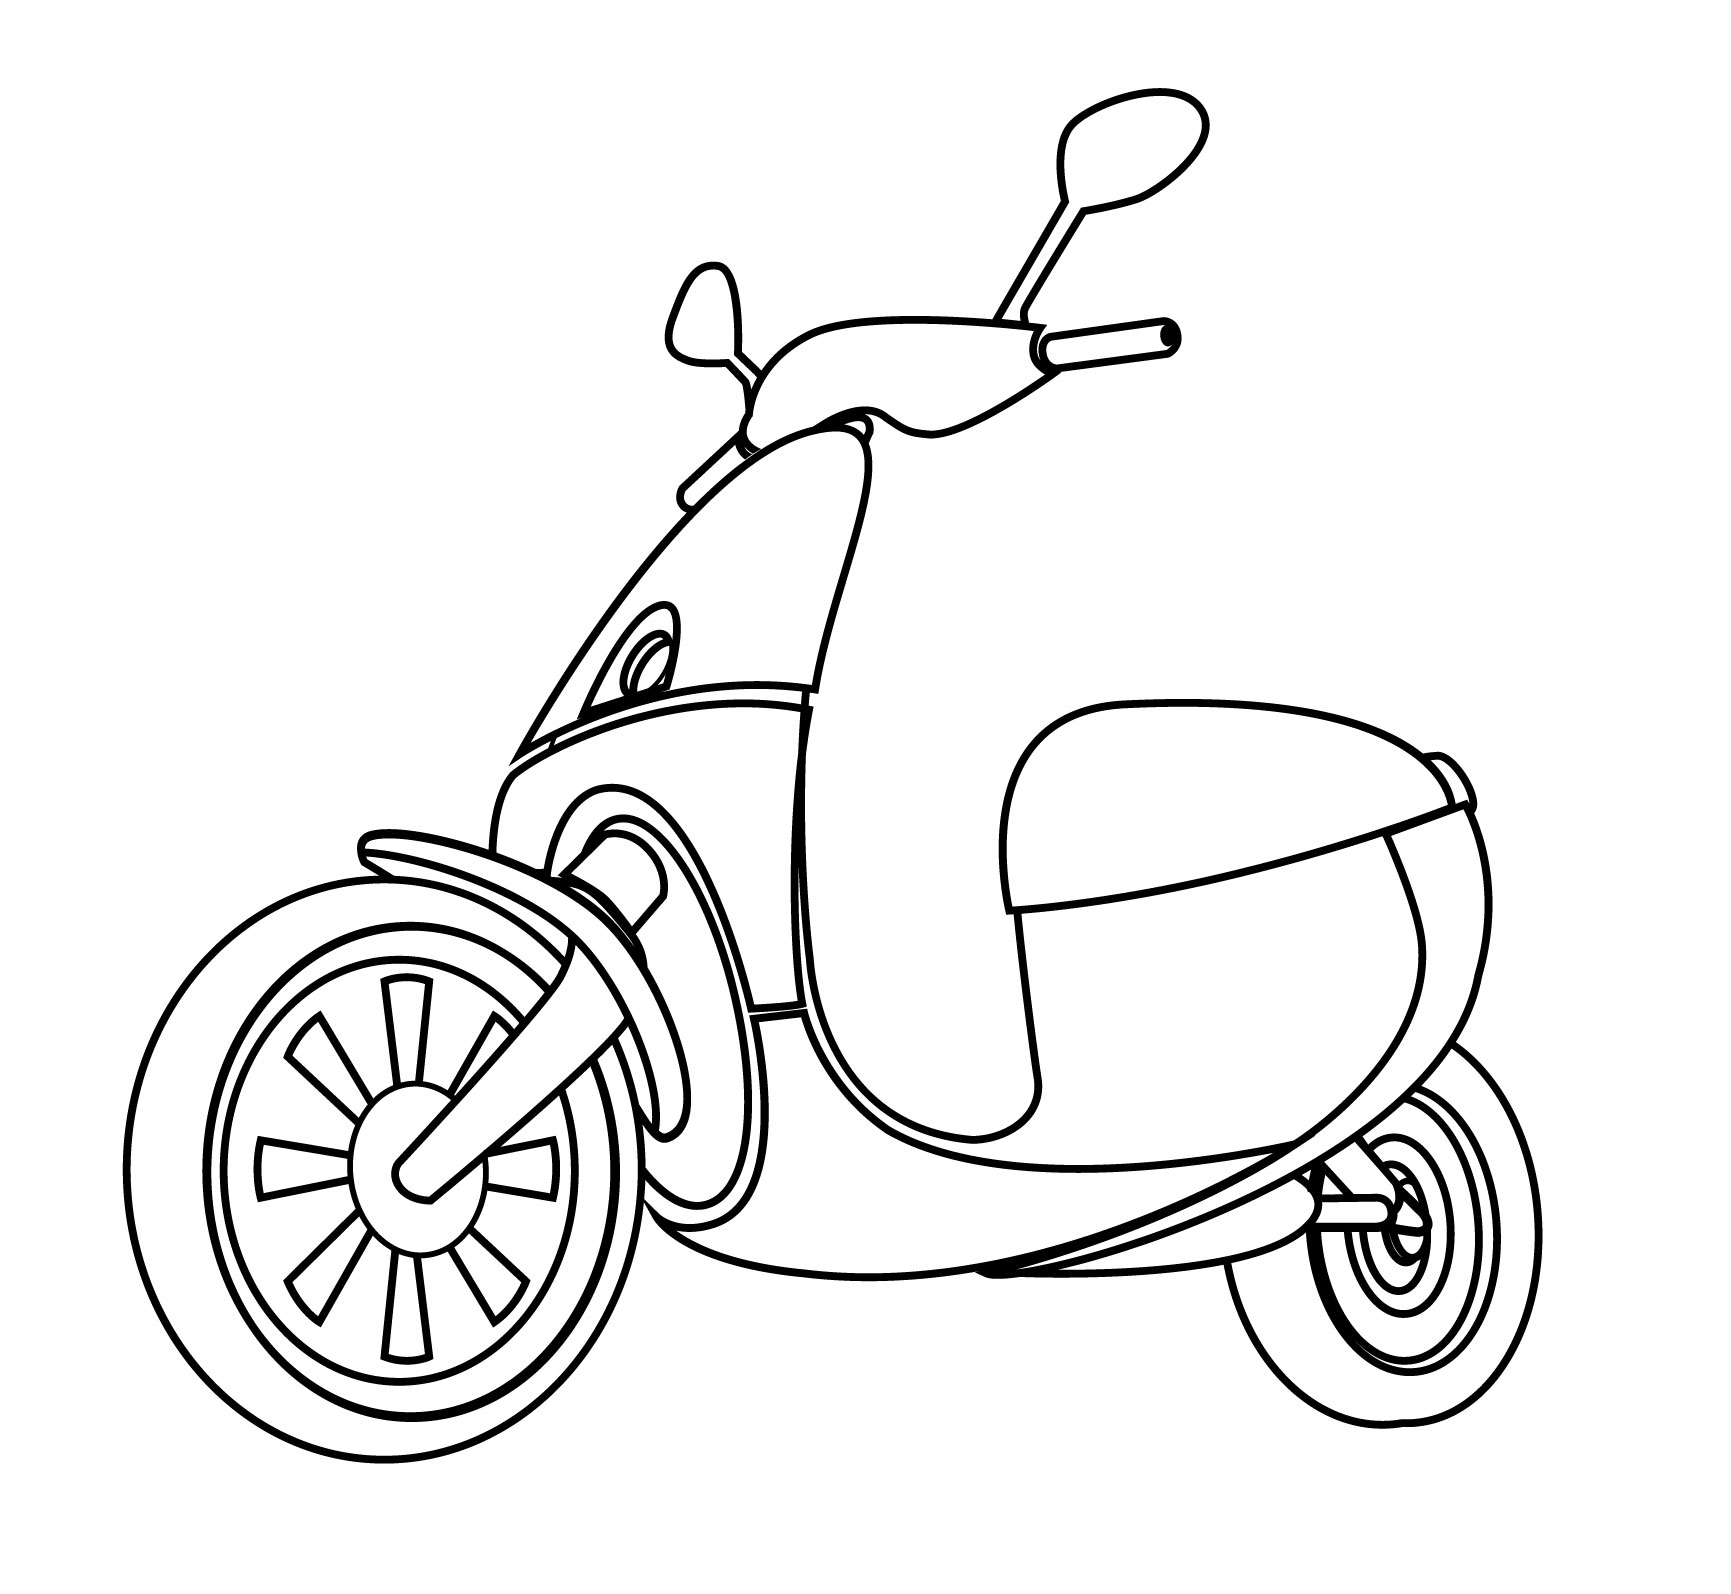 motocycle-clipart